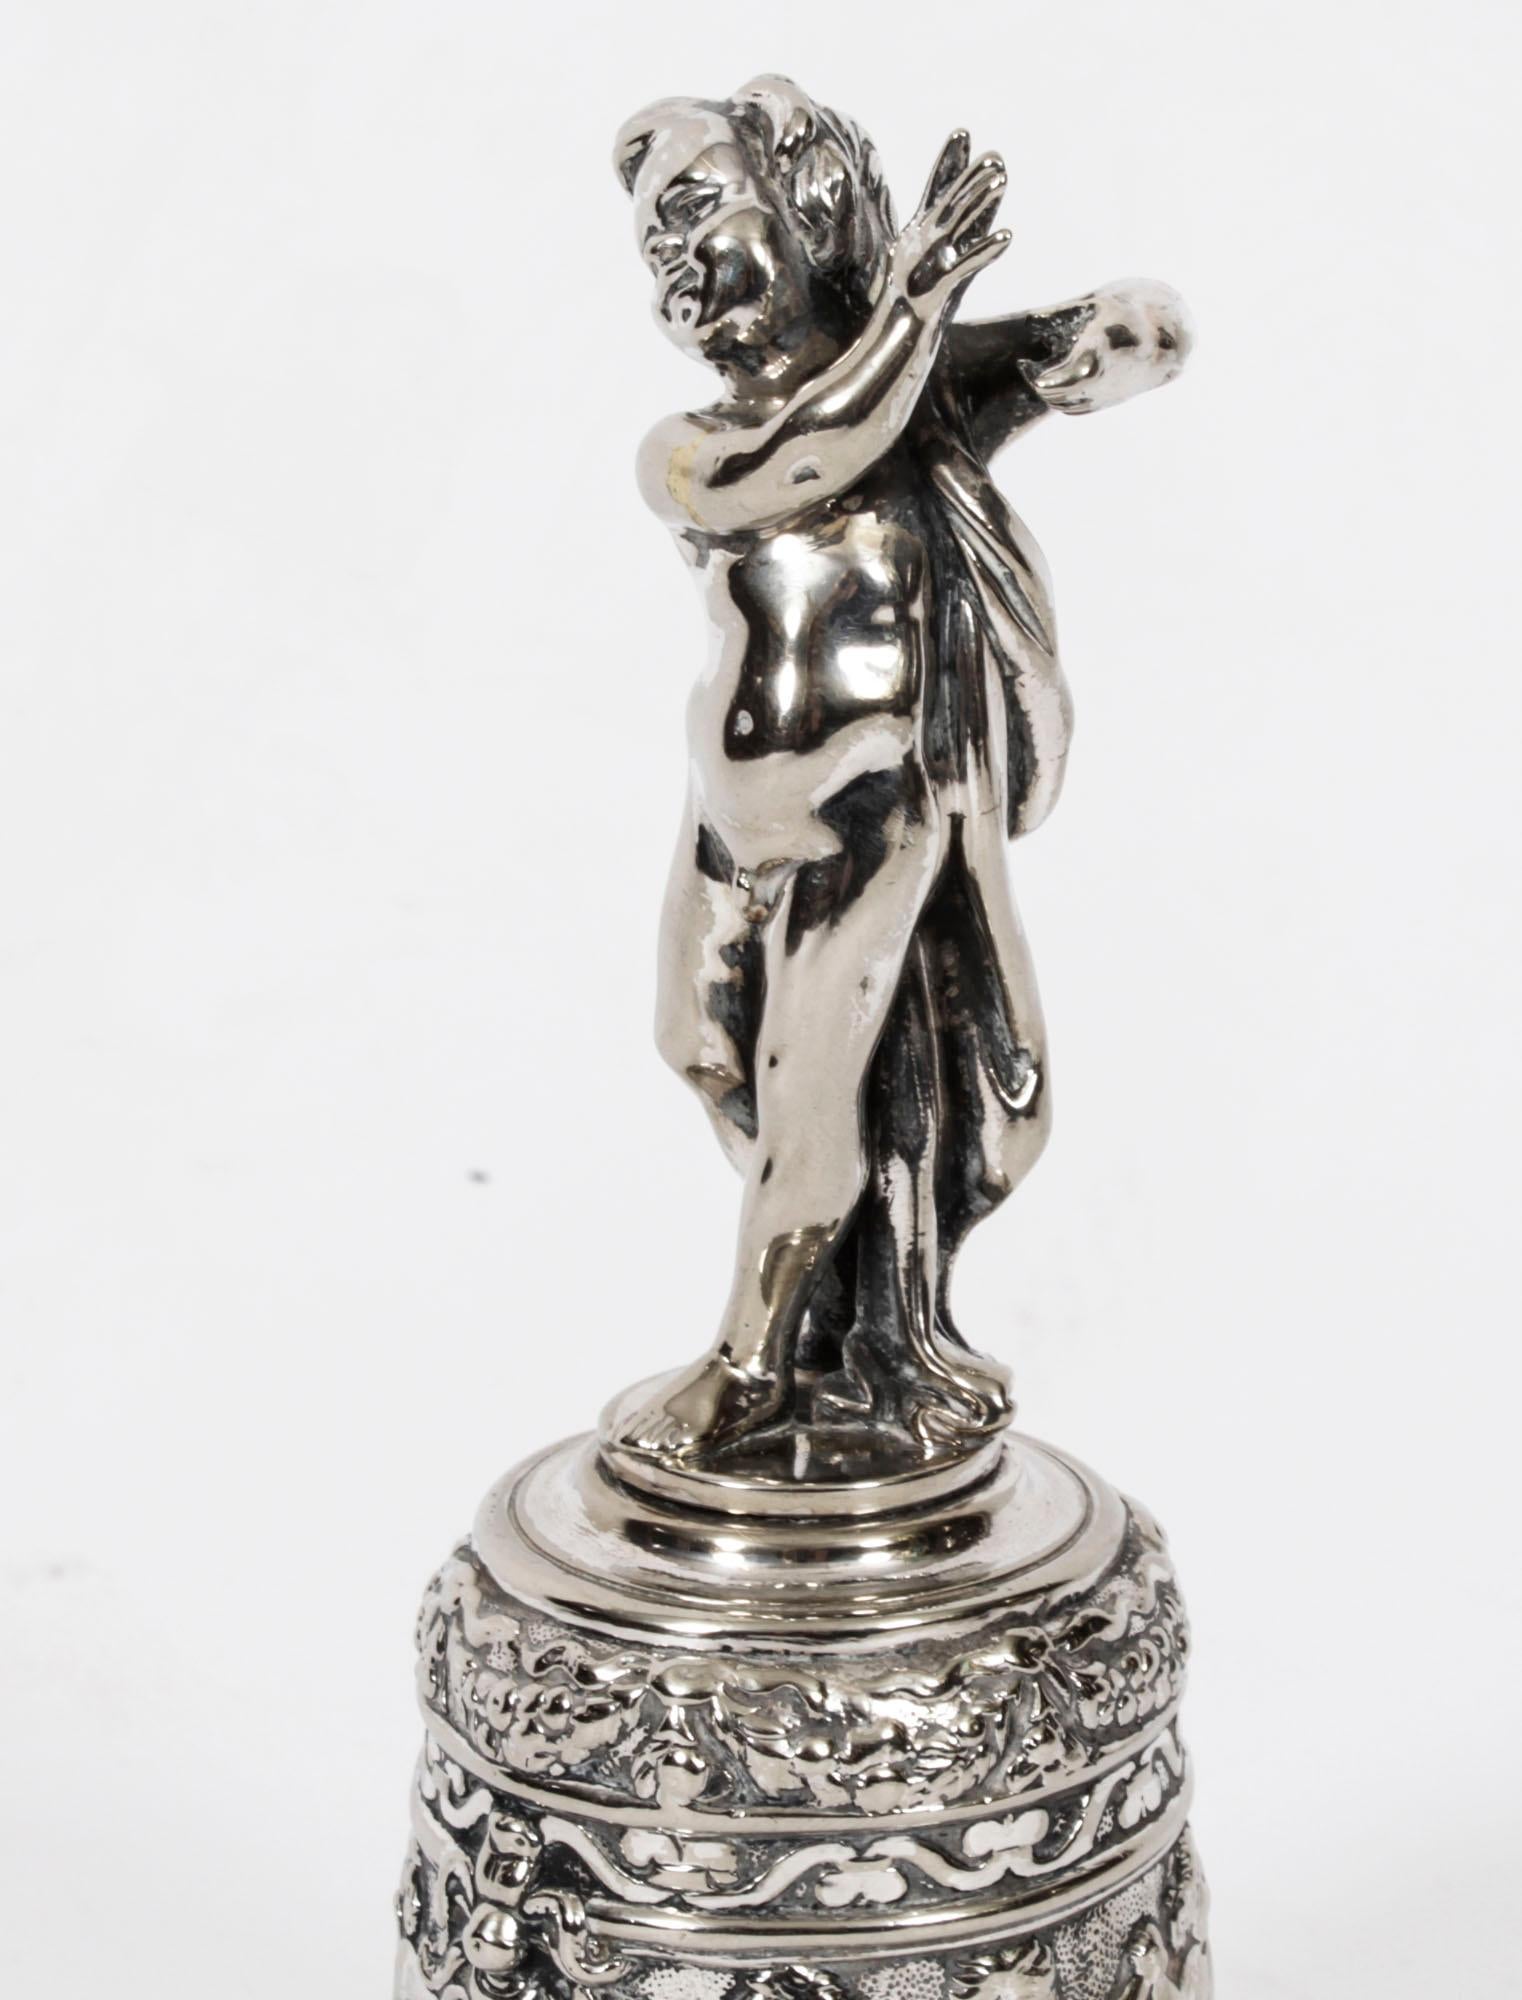 Antique Silver Plated  Renaissance Revival  Hand Bell by the renowned silversmith and retailer, Elkington & Co, late 19th Century in date.

The heavy cast bell surmounted with a cherub figure, the bell further worked with dancing cherubs. 
This bell